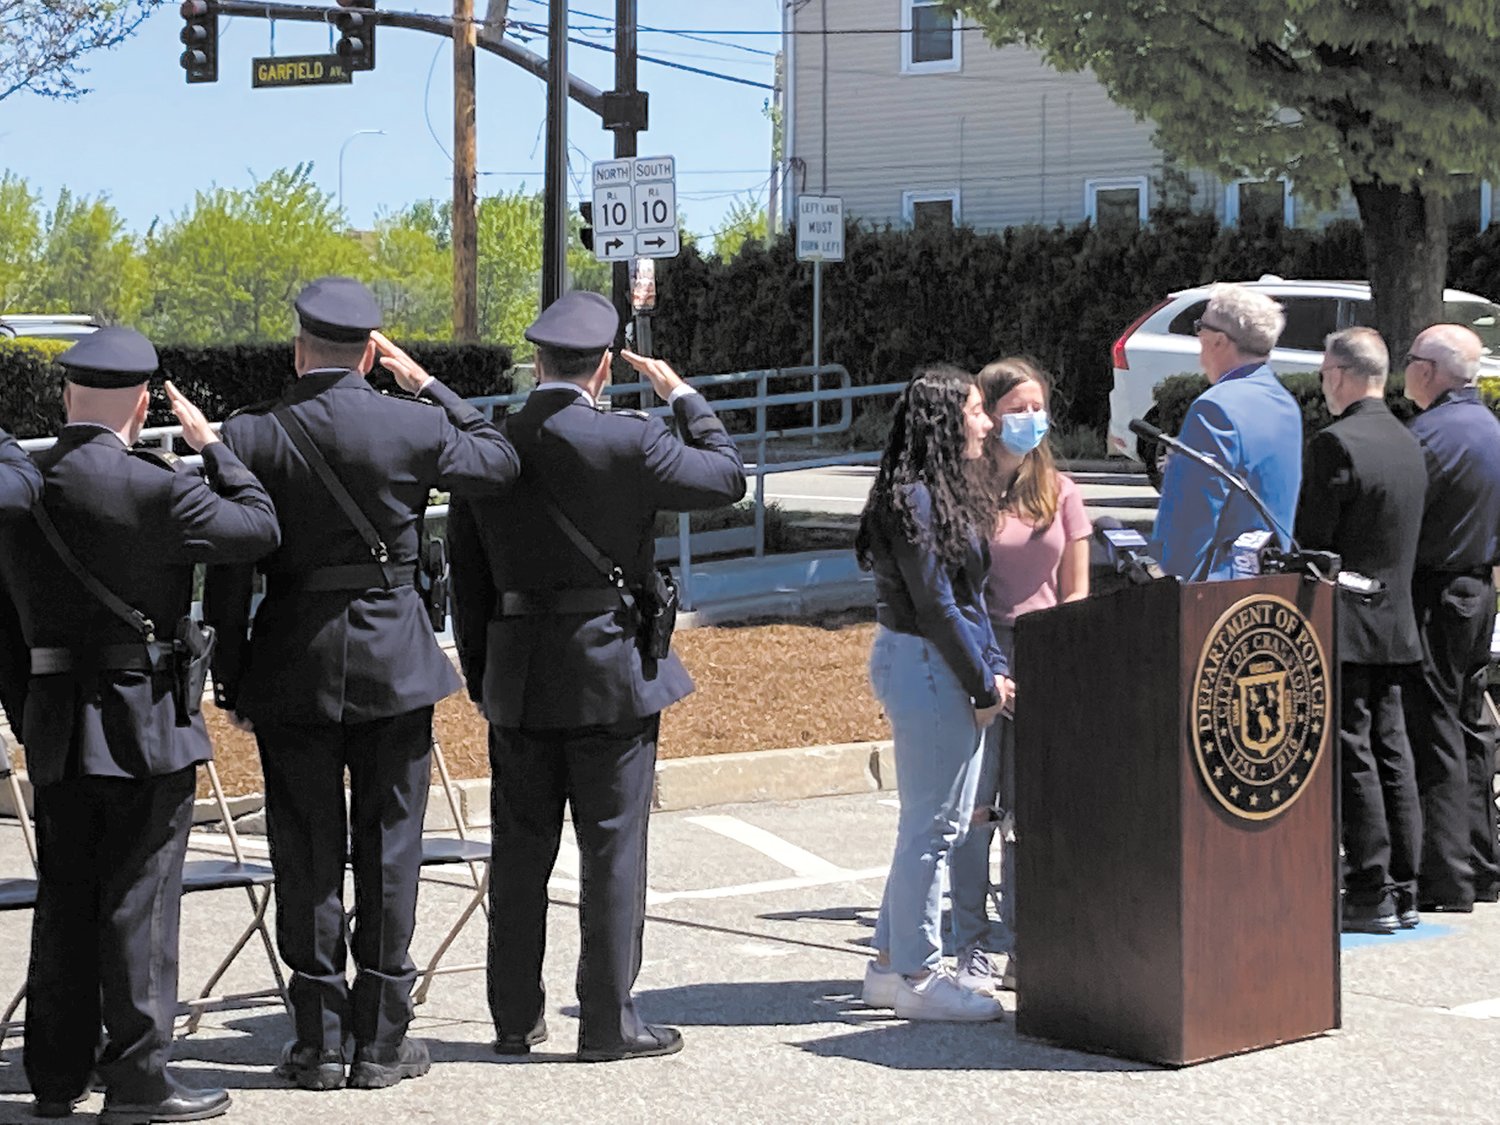 AMERICAN RECOGNITION: Local students, Hailey Bobeck and Marina Mancini, sing the National Anthem at Cranston’s police memorial service on May 18.